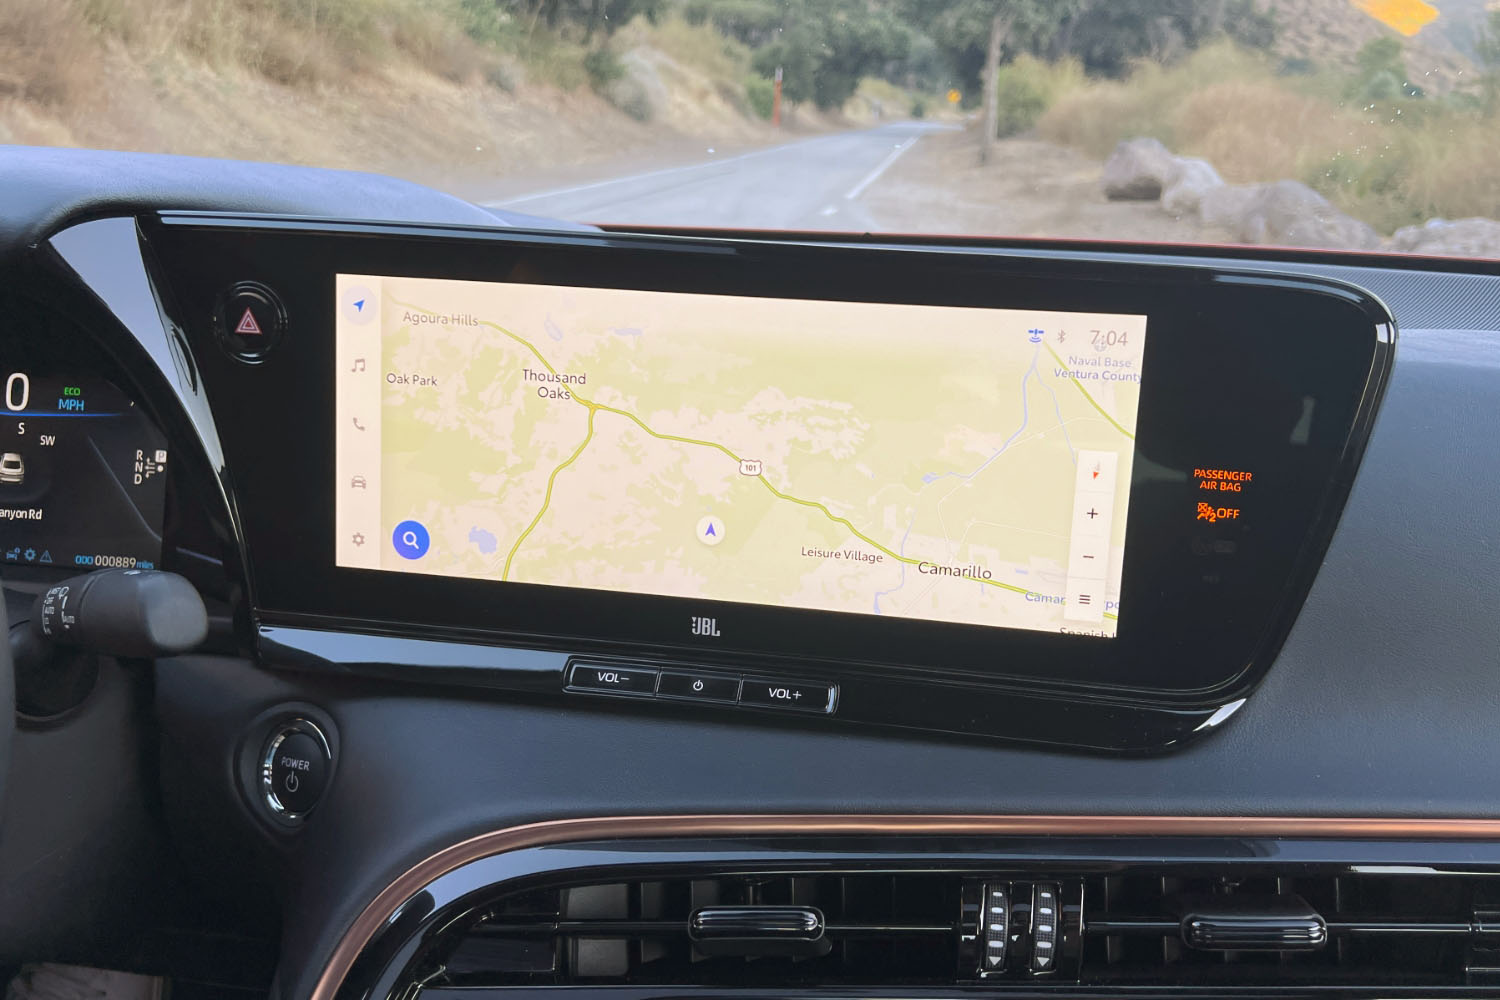 Infotainment screen in the 2023 Toyota Mirai showing a map